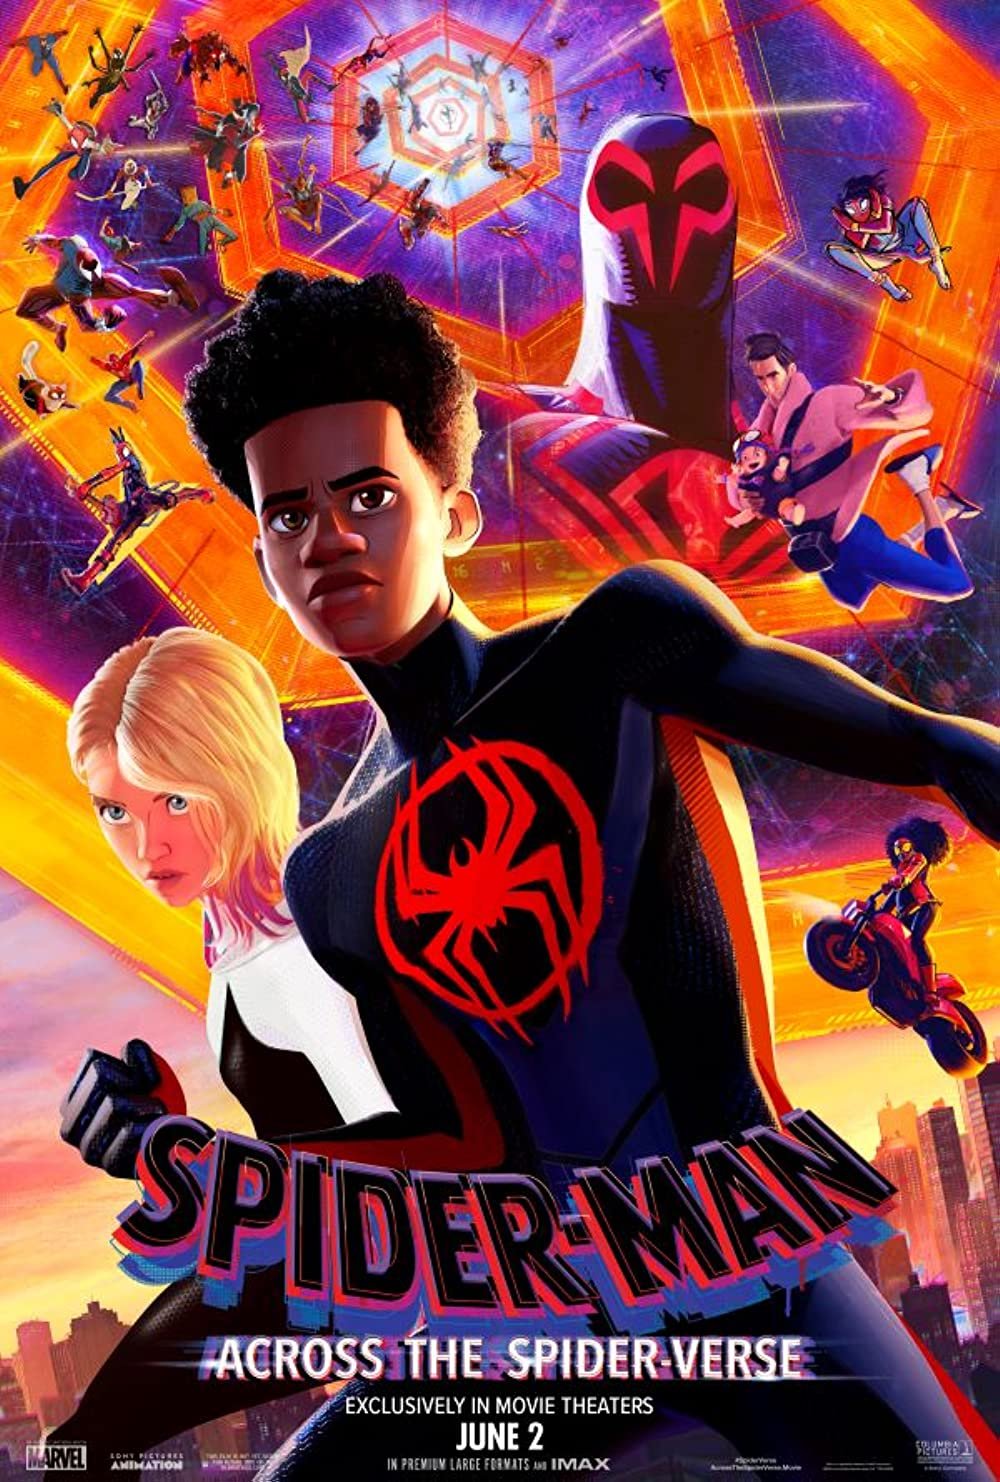 Across The Spider-Verse images © Sony Pictures